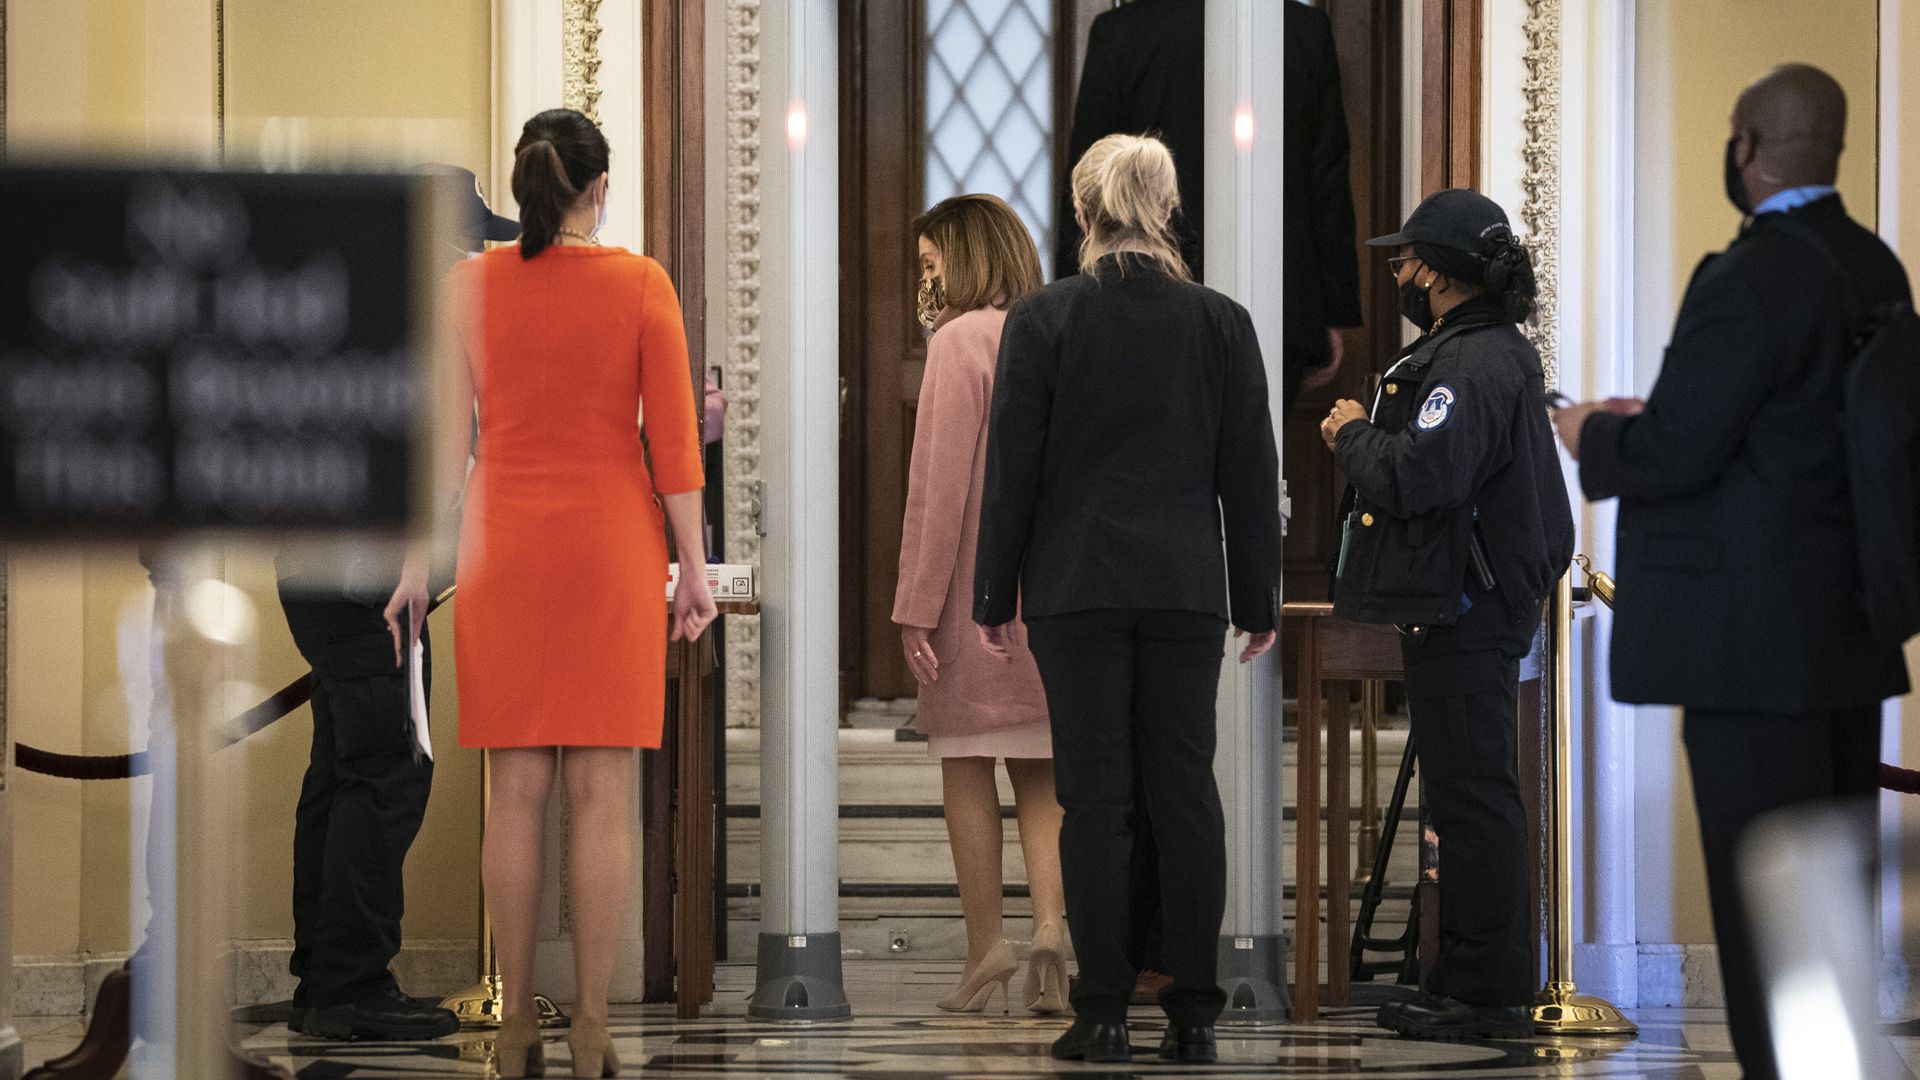 Speaker of the House Nancy Pelosi (D-CA) walks through a metal detector before entering the House Chamber at the U.S. Capitol on January 21, 2021 in Washington, DC. 